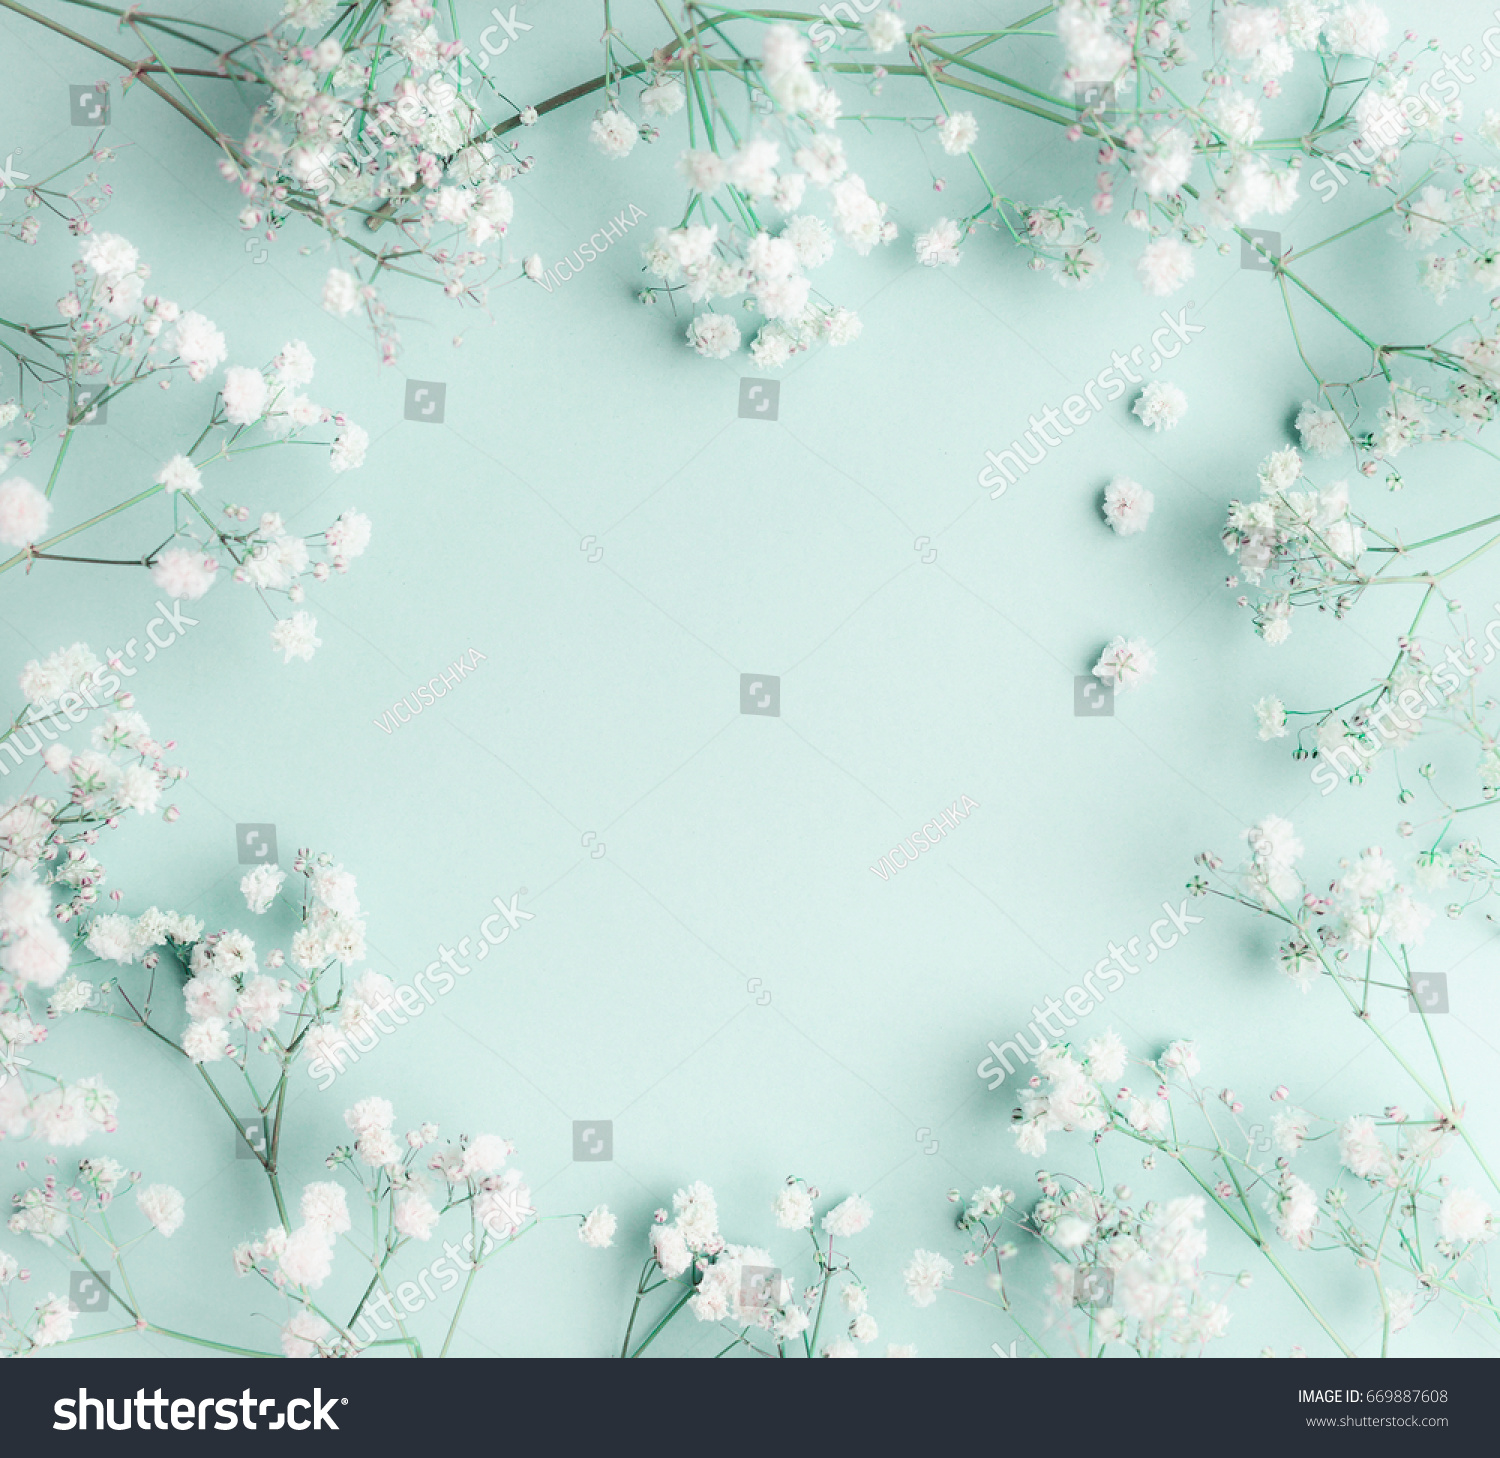 Floral composition with light, airy masses of small white flowers on turquoise blue background, top view, frame.  Gypsophila Baby's-breath flowers #669887608